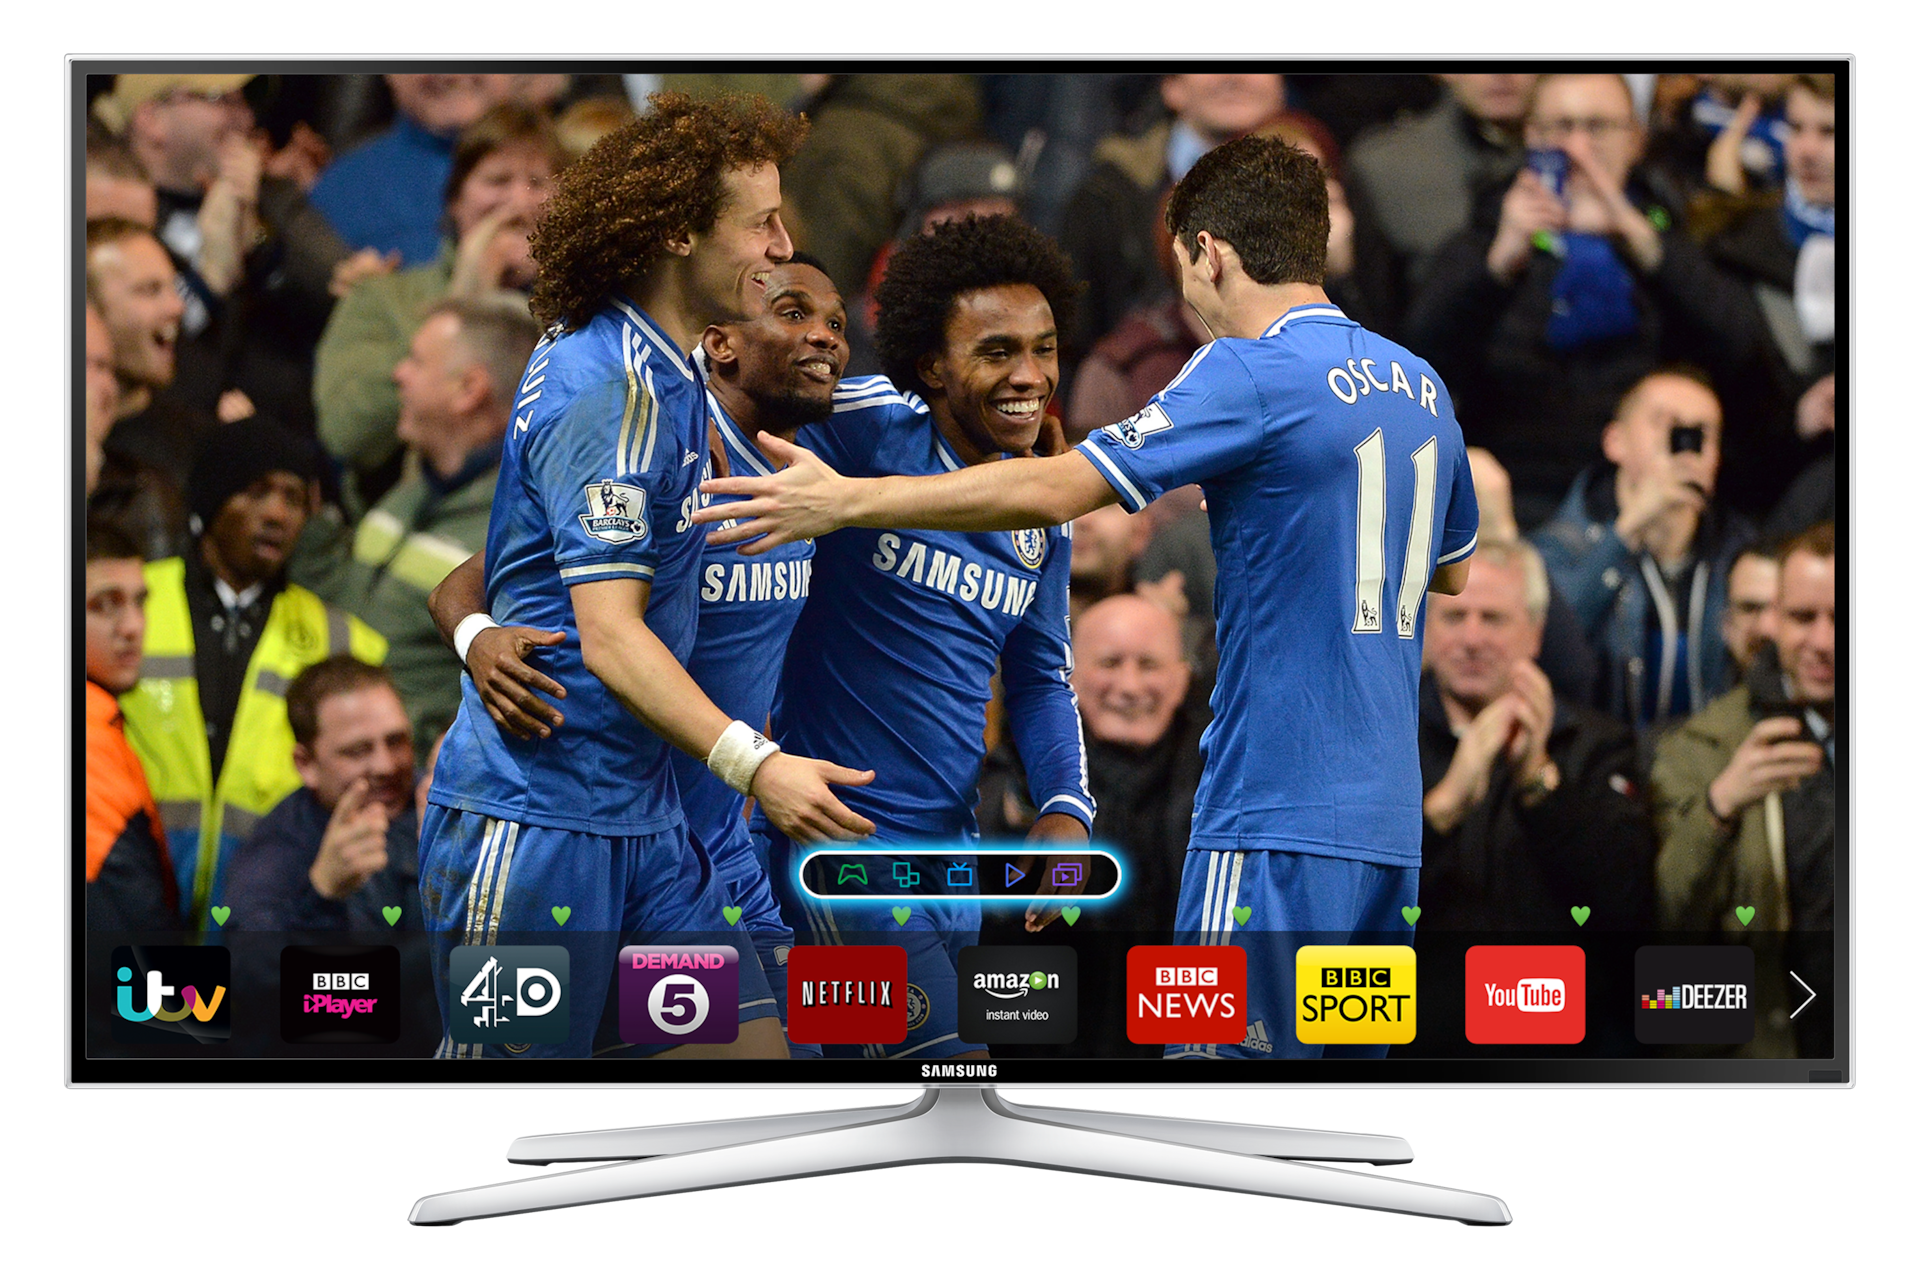 Samsung 40-Inch H6400 Series 6 Smart 3D LED TV Features3000 x 2000